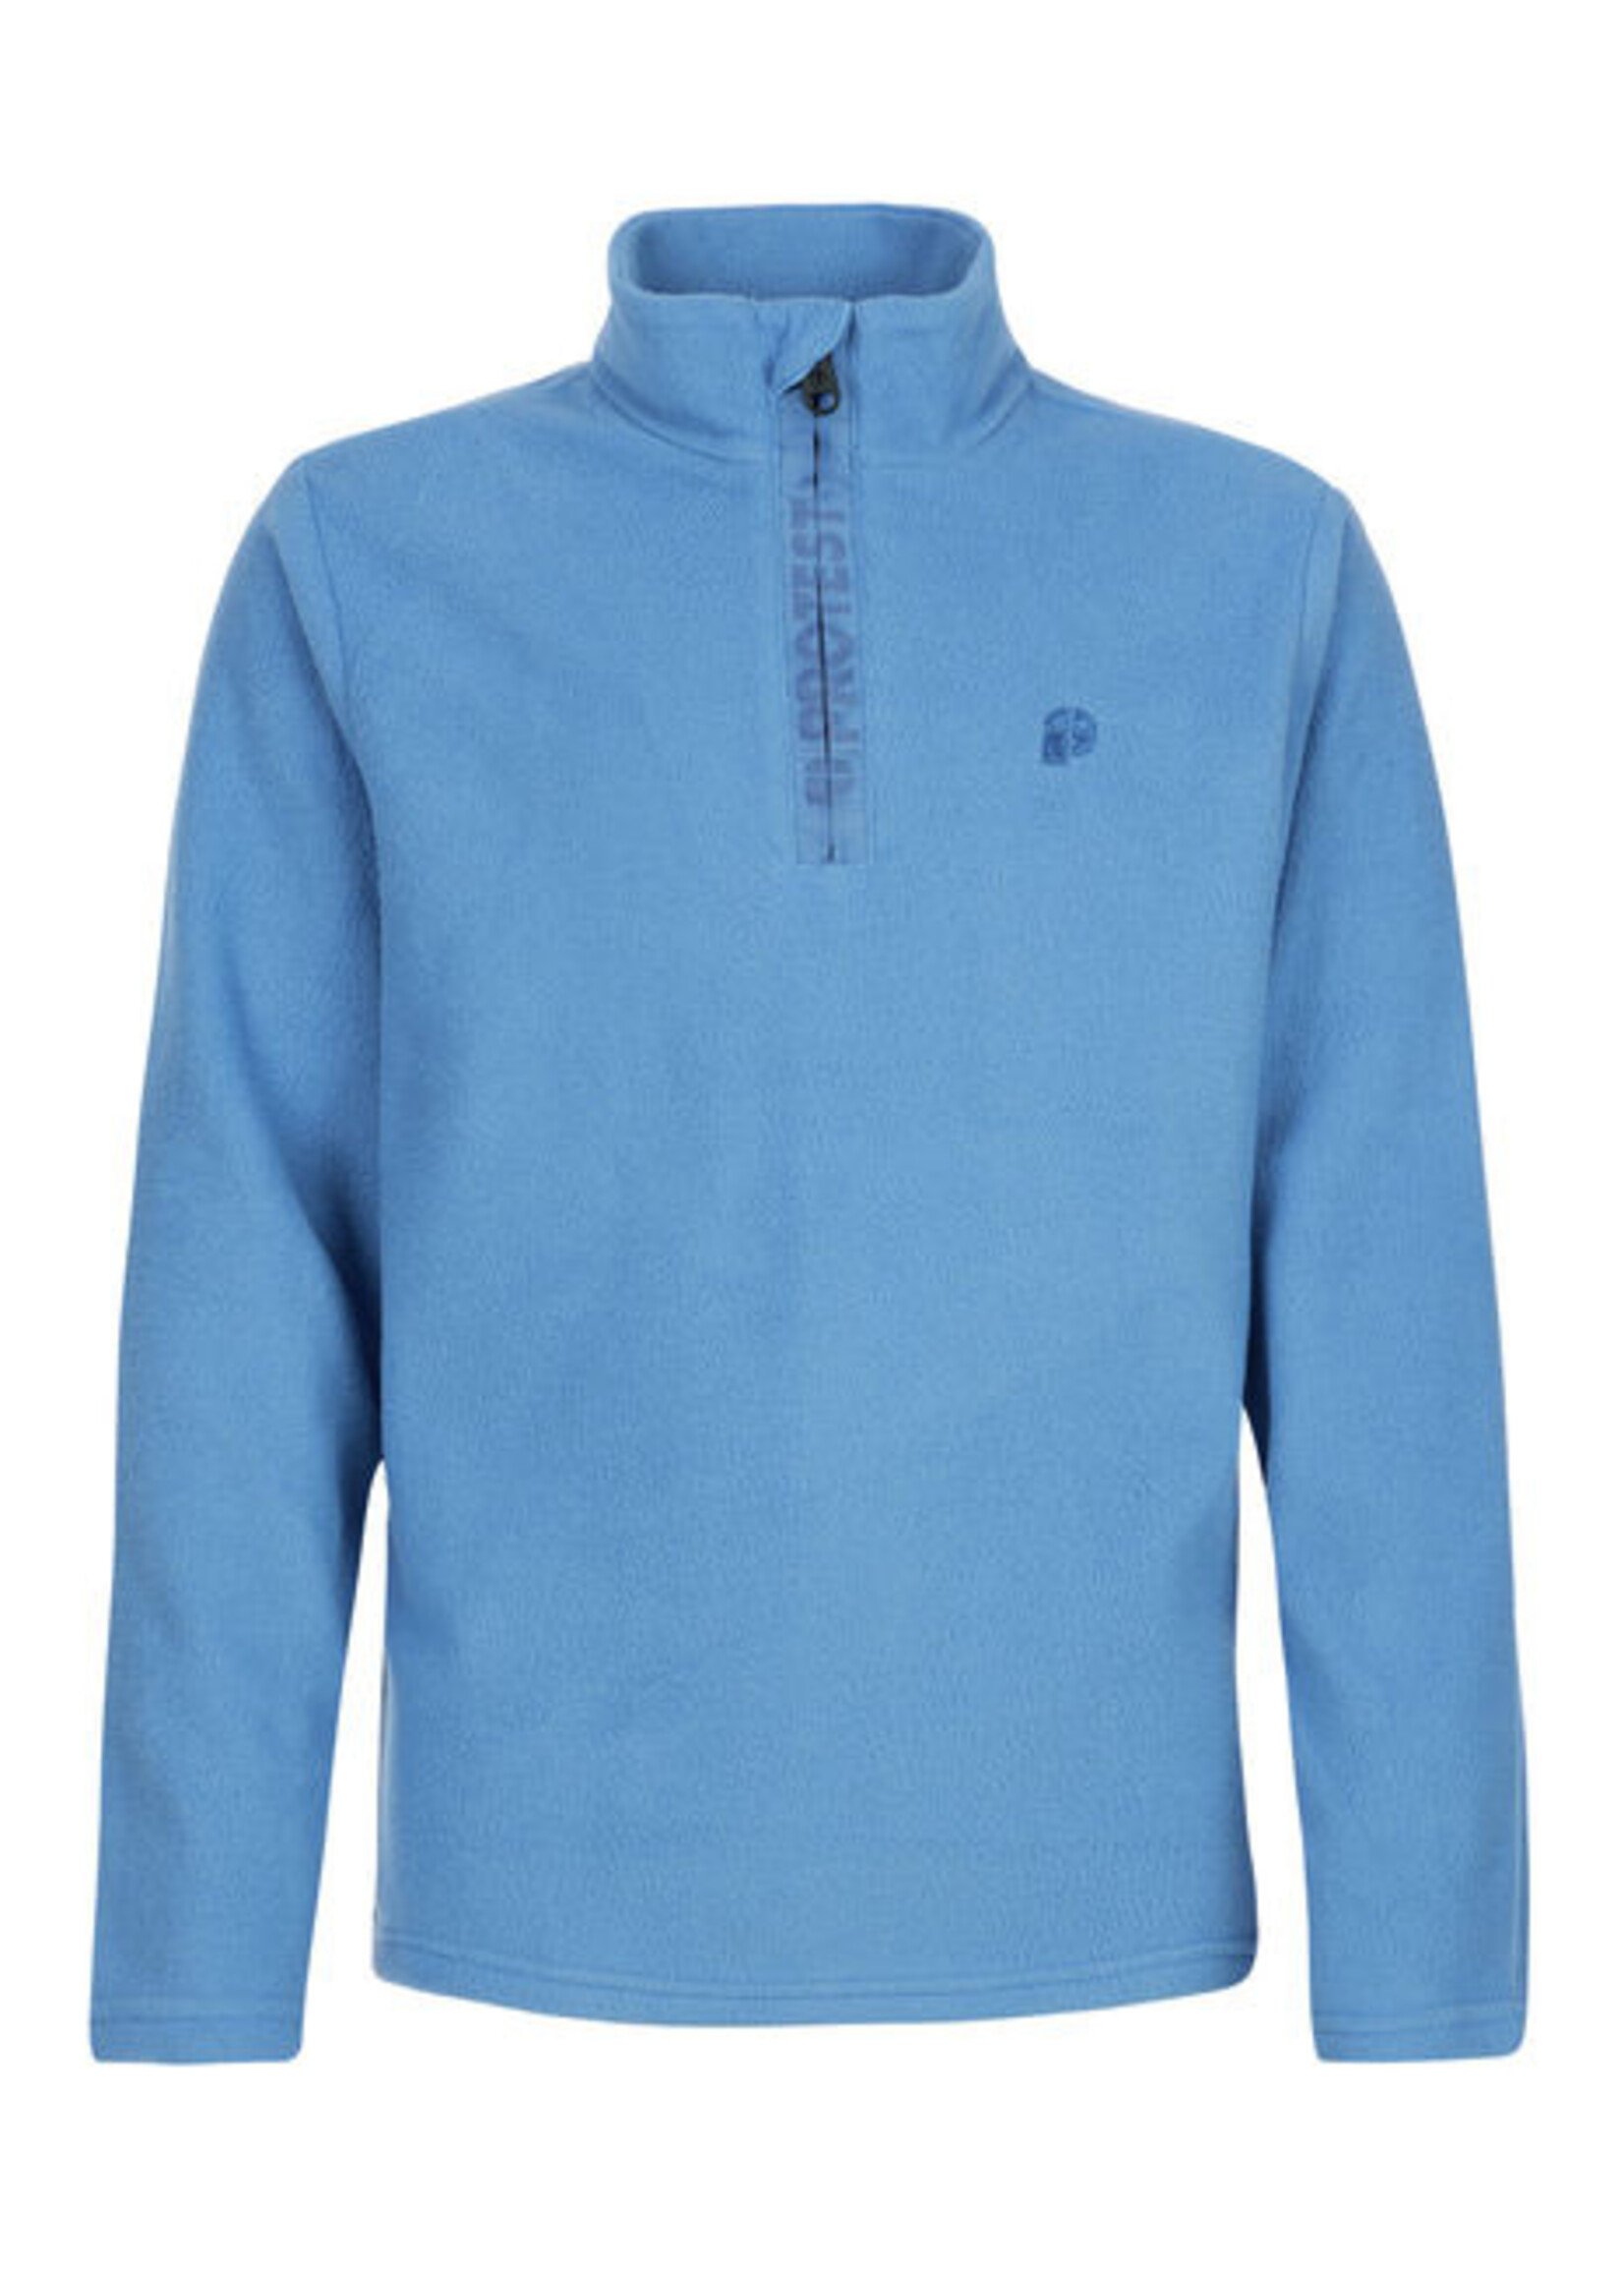 PROTEST  PERFECTY JR 1/4 zip top-Blue Nights